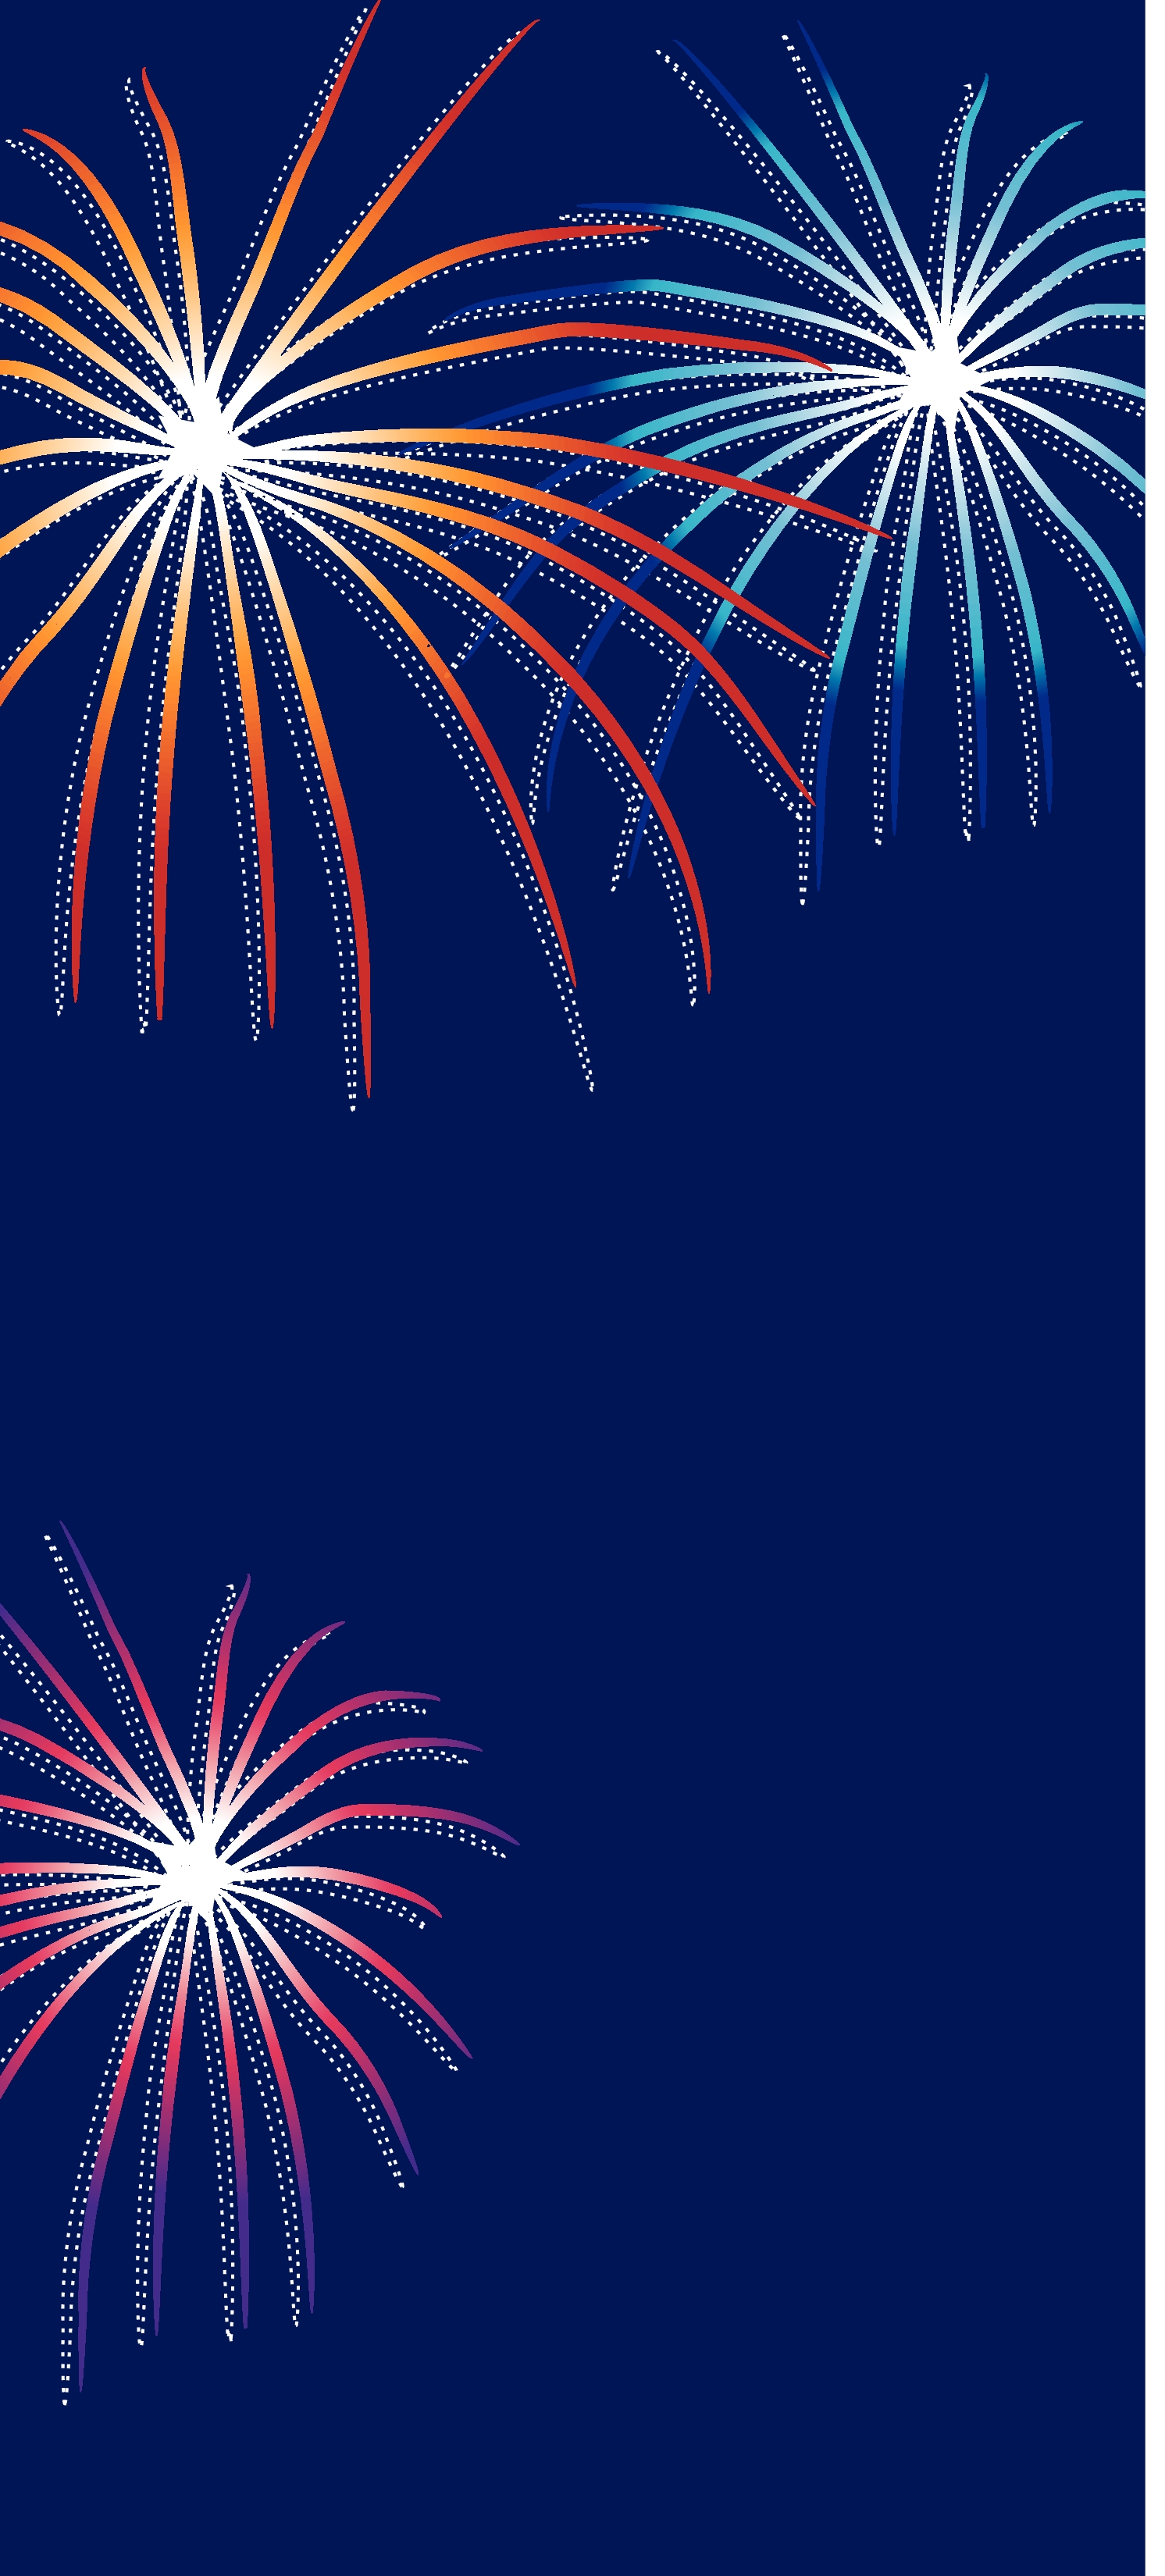 Add Some Color to Your 4th of July with Backgrounds